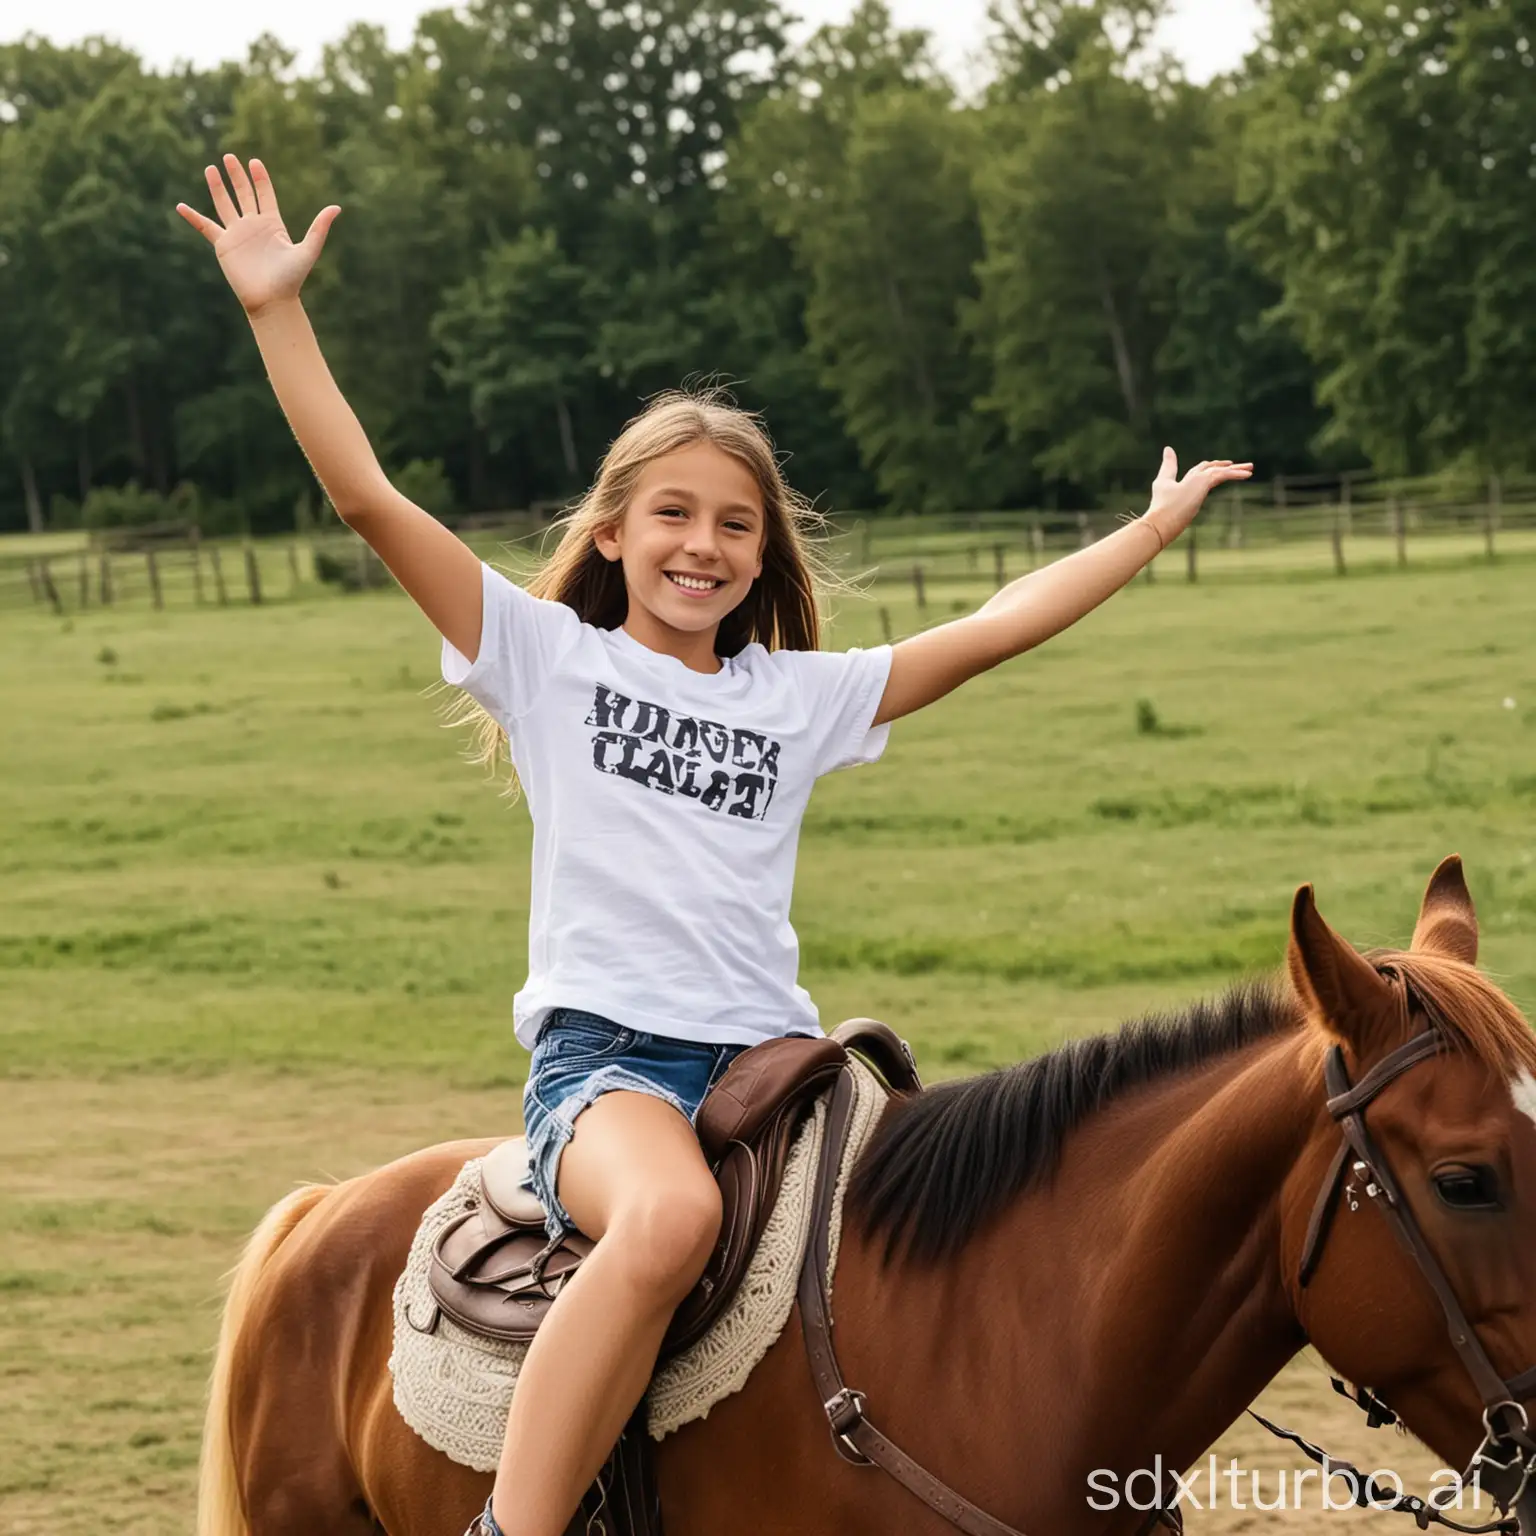 10 year old girl with t-shirt and short shorts riding a horse bareback, holding hands upright in the air